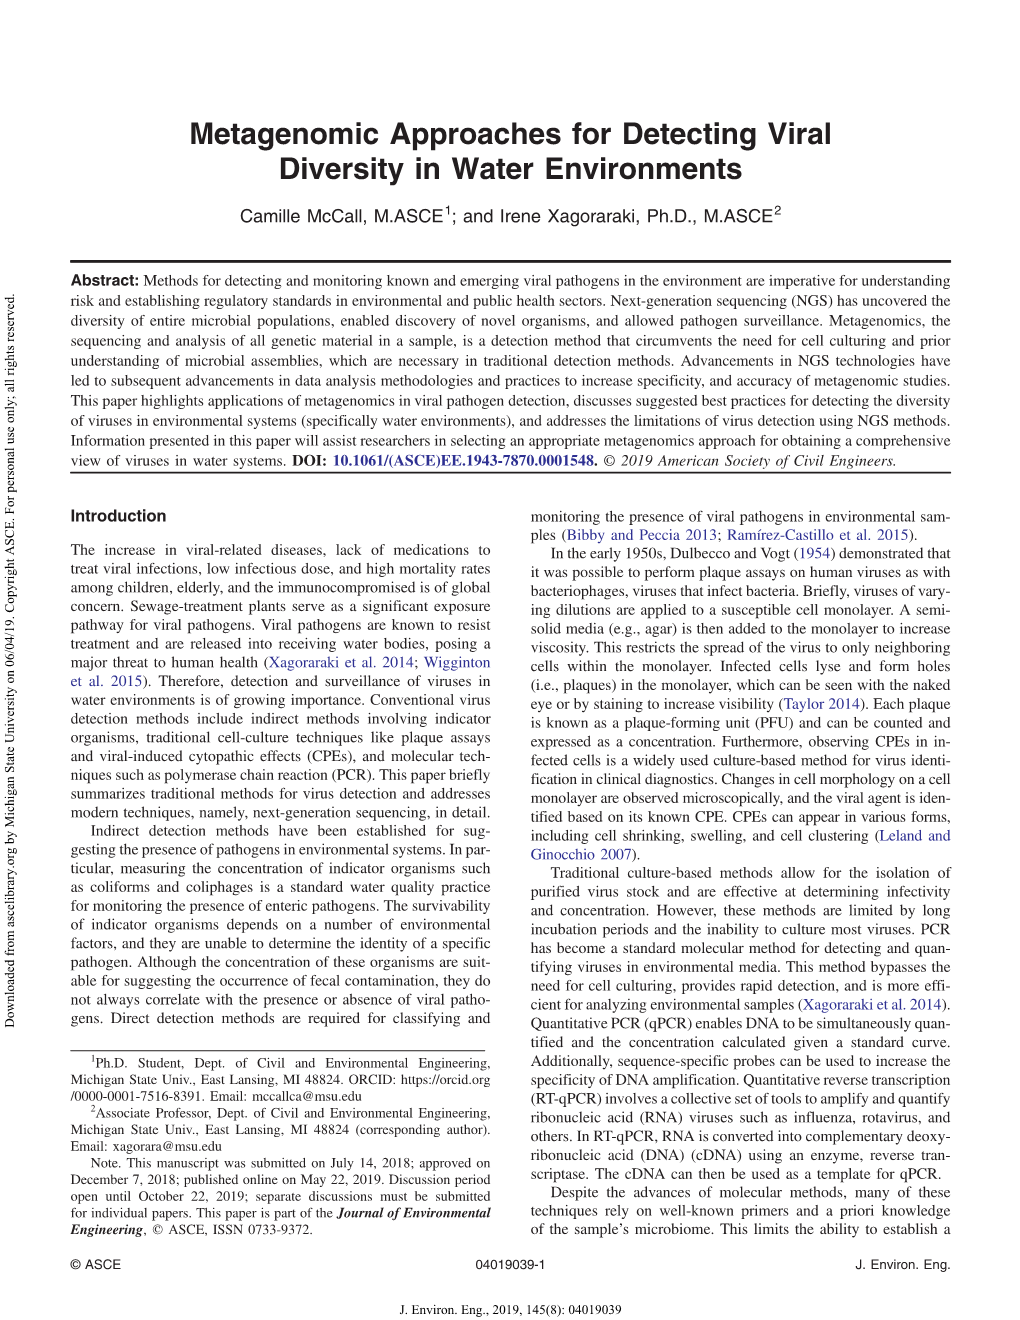 Metagenomic Approaches for Detecting Viral Diversity in Water Environments